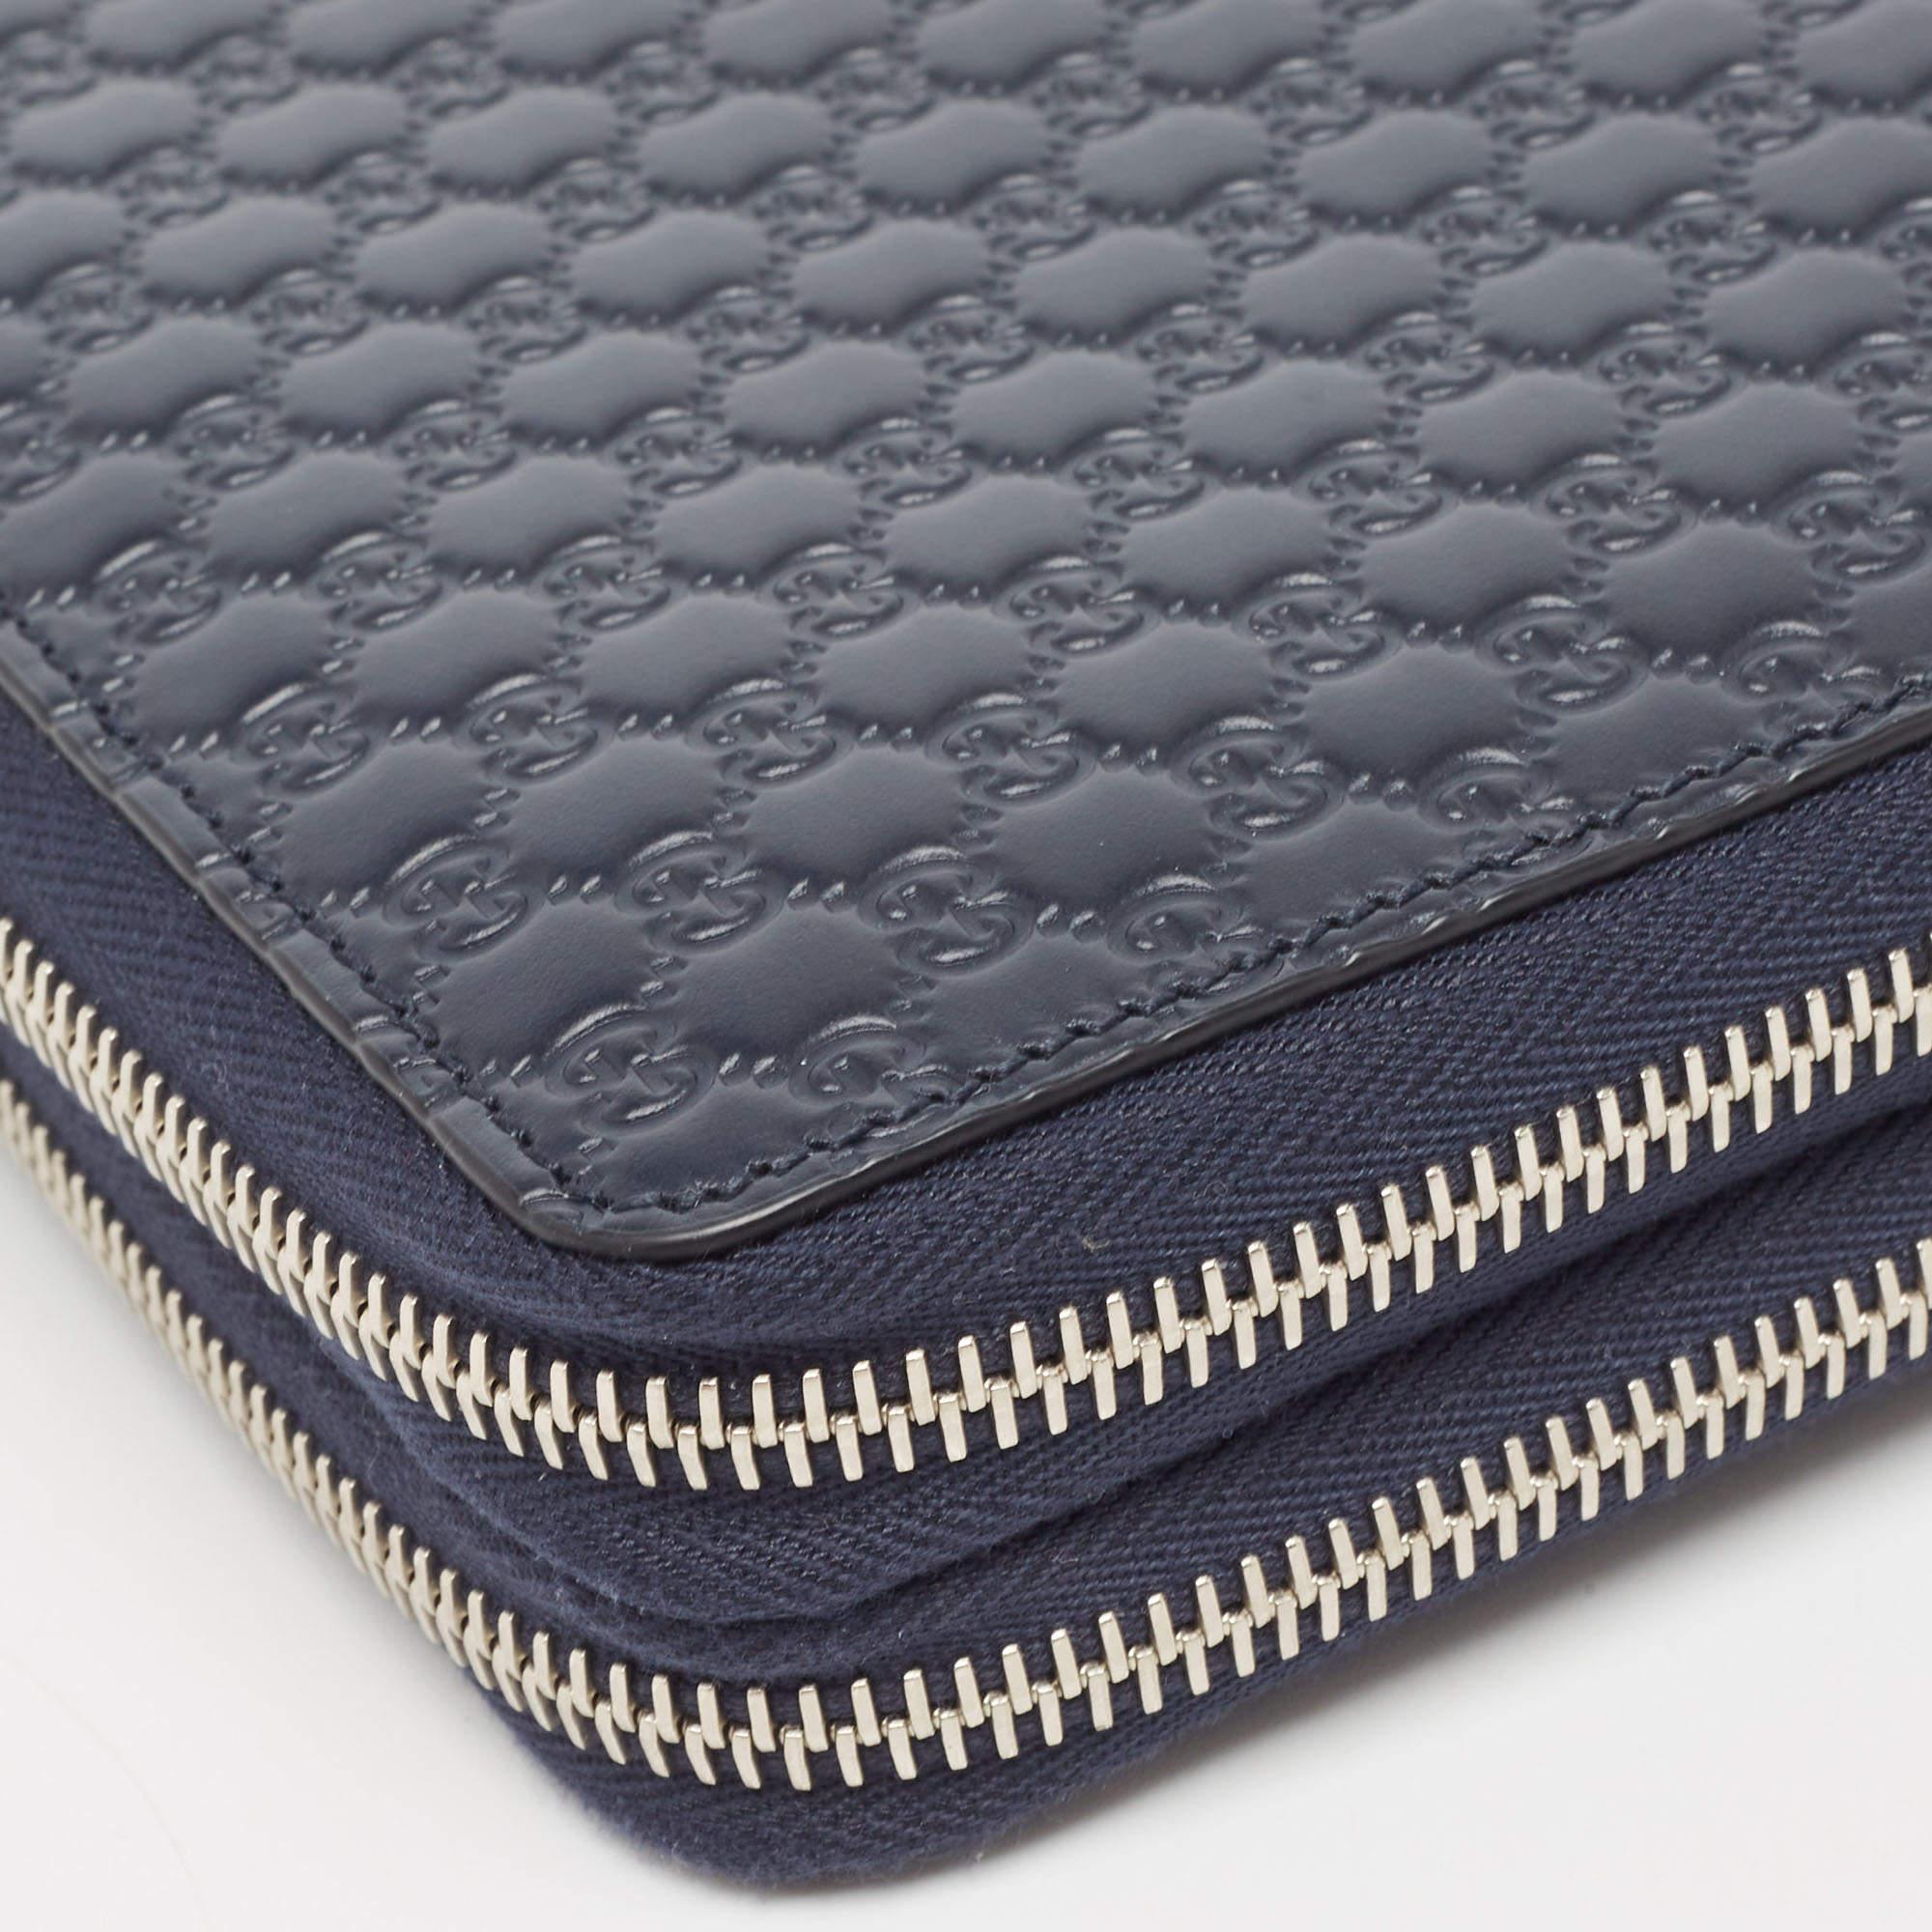 Gucci Navy Blue Microguccissima Leather Zip Around Travel Wallet 2